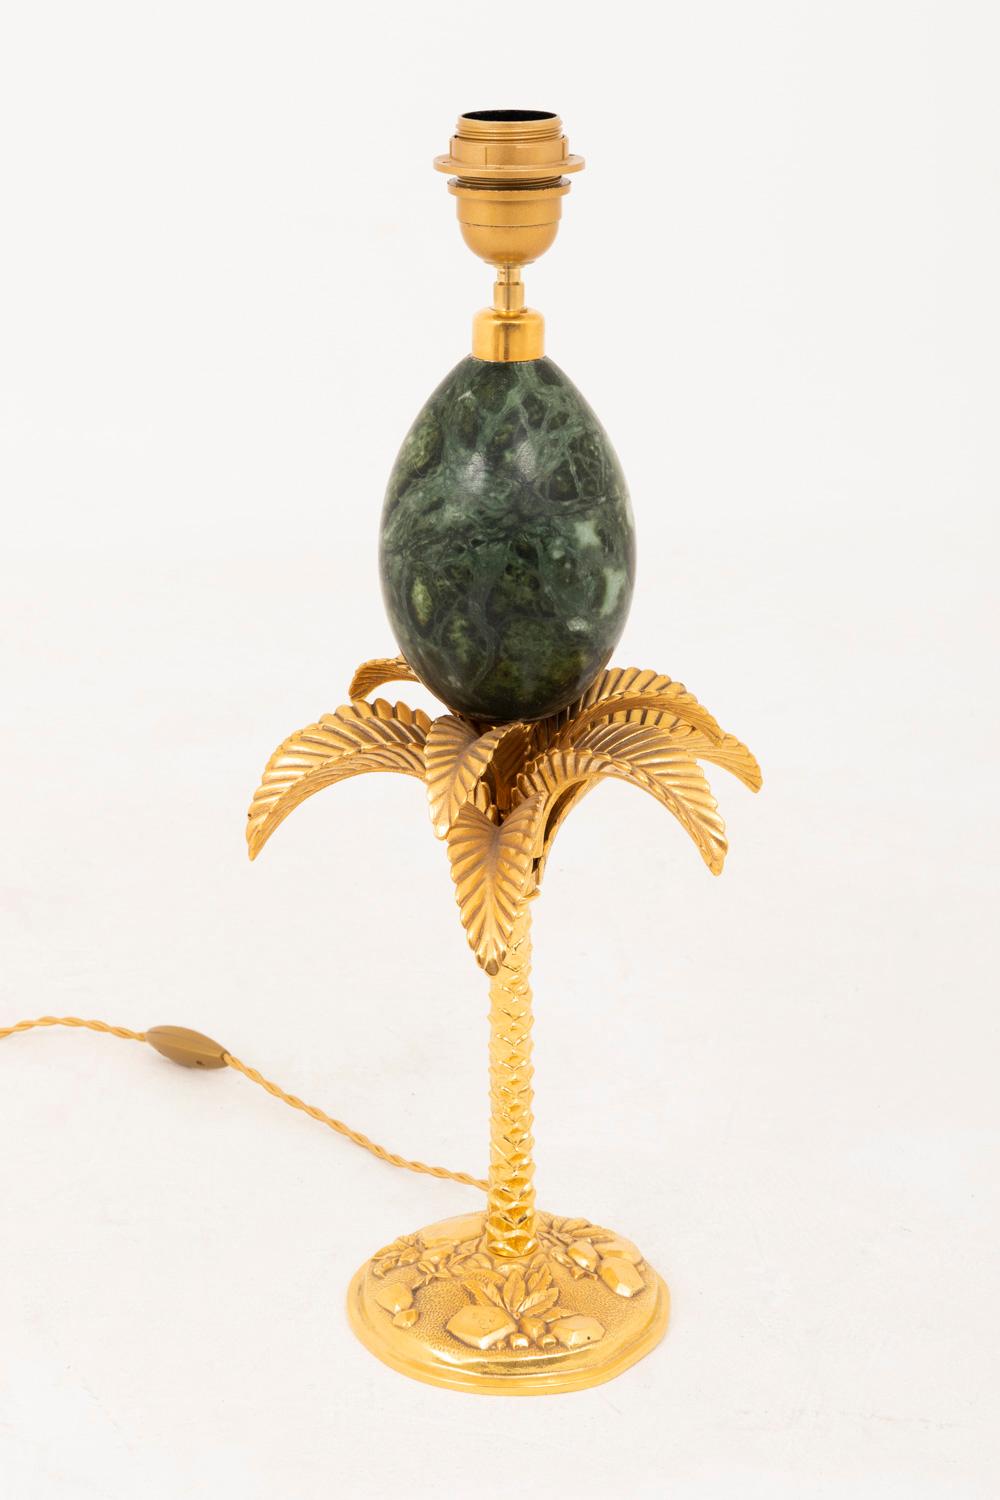 Maison Charles, in the style of.
Palm tree lamp with a shaft in green marble egg shape standing on palm tree in chiselled and gilt bronze.
Circular base in gilt bronze with a guilloche background and relief decor of stones and leaves.

Circular